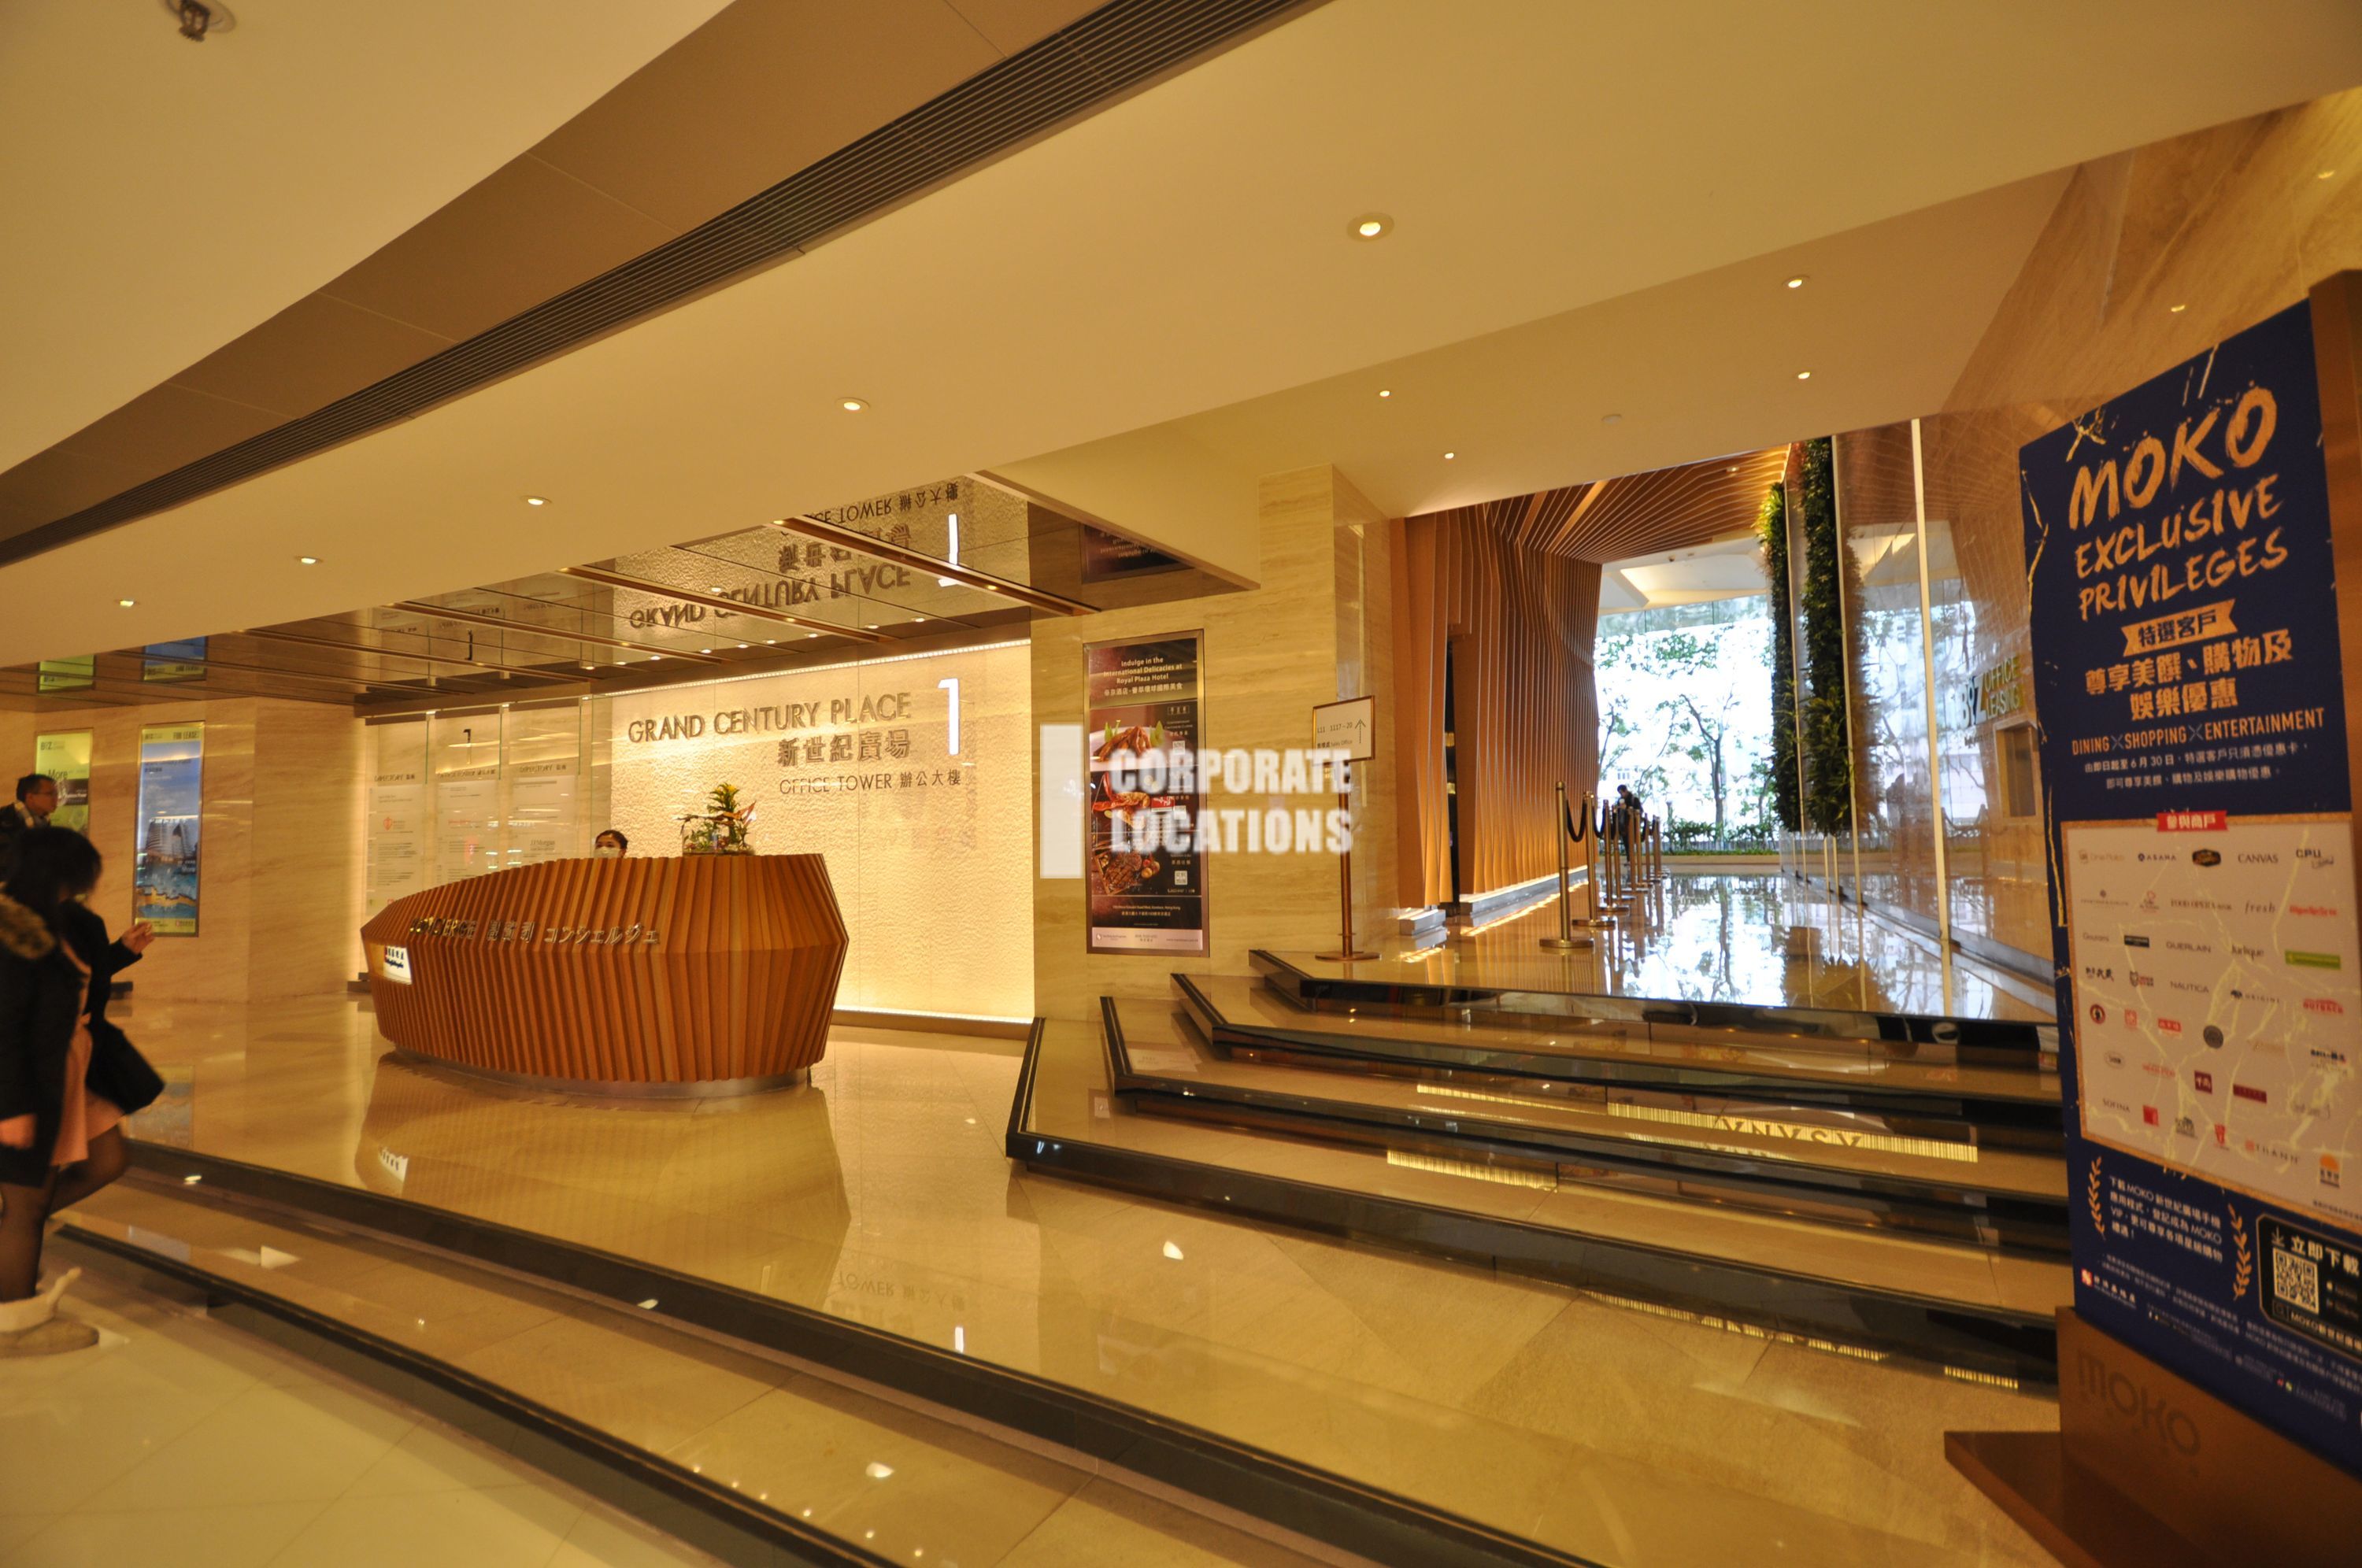 Typical Interior Commercial space in Grand Century Place Tower 1 - Mongkok